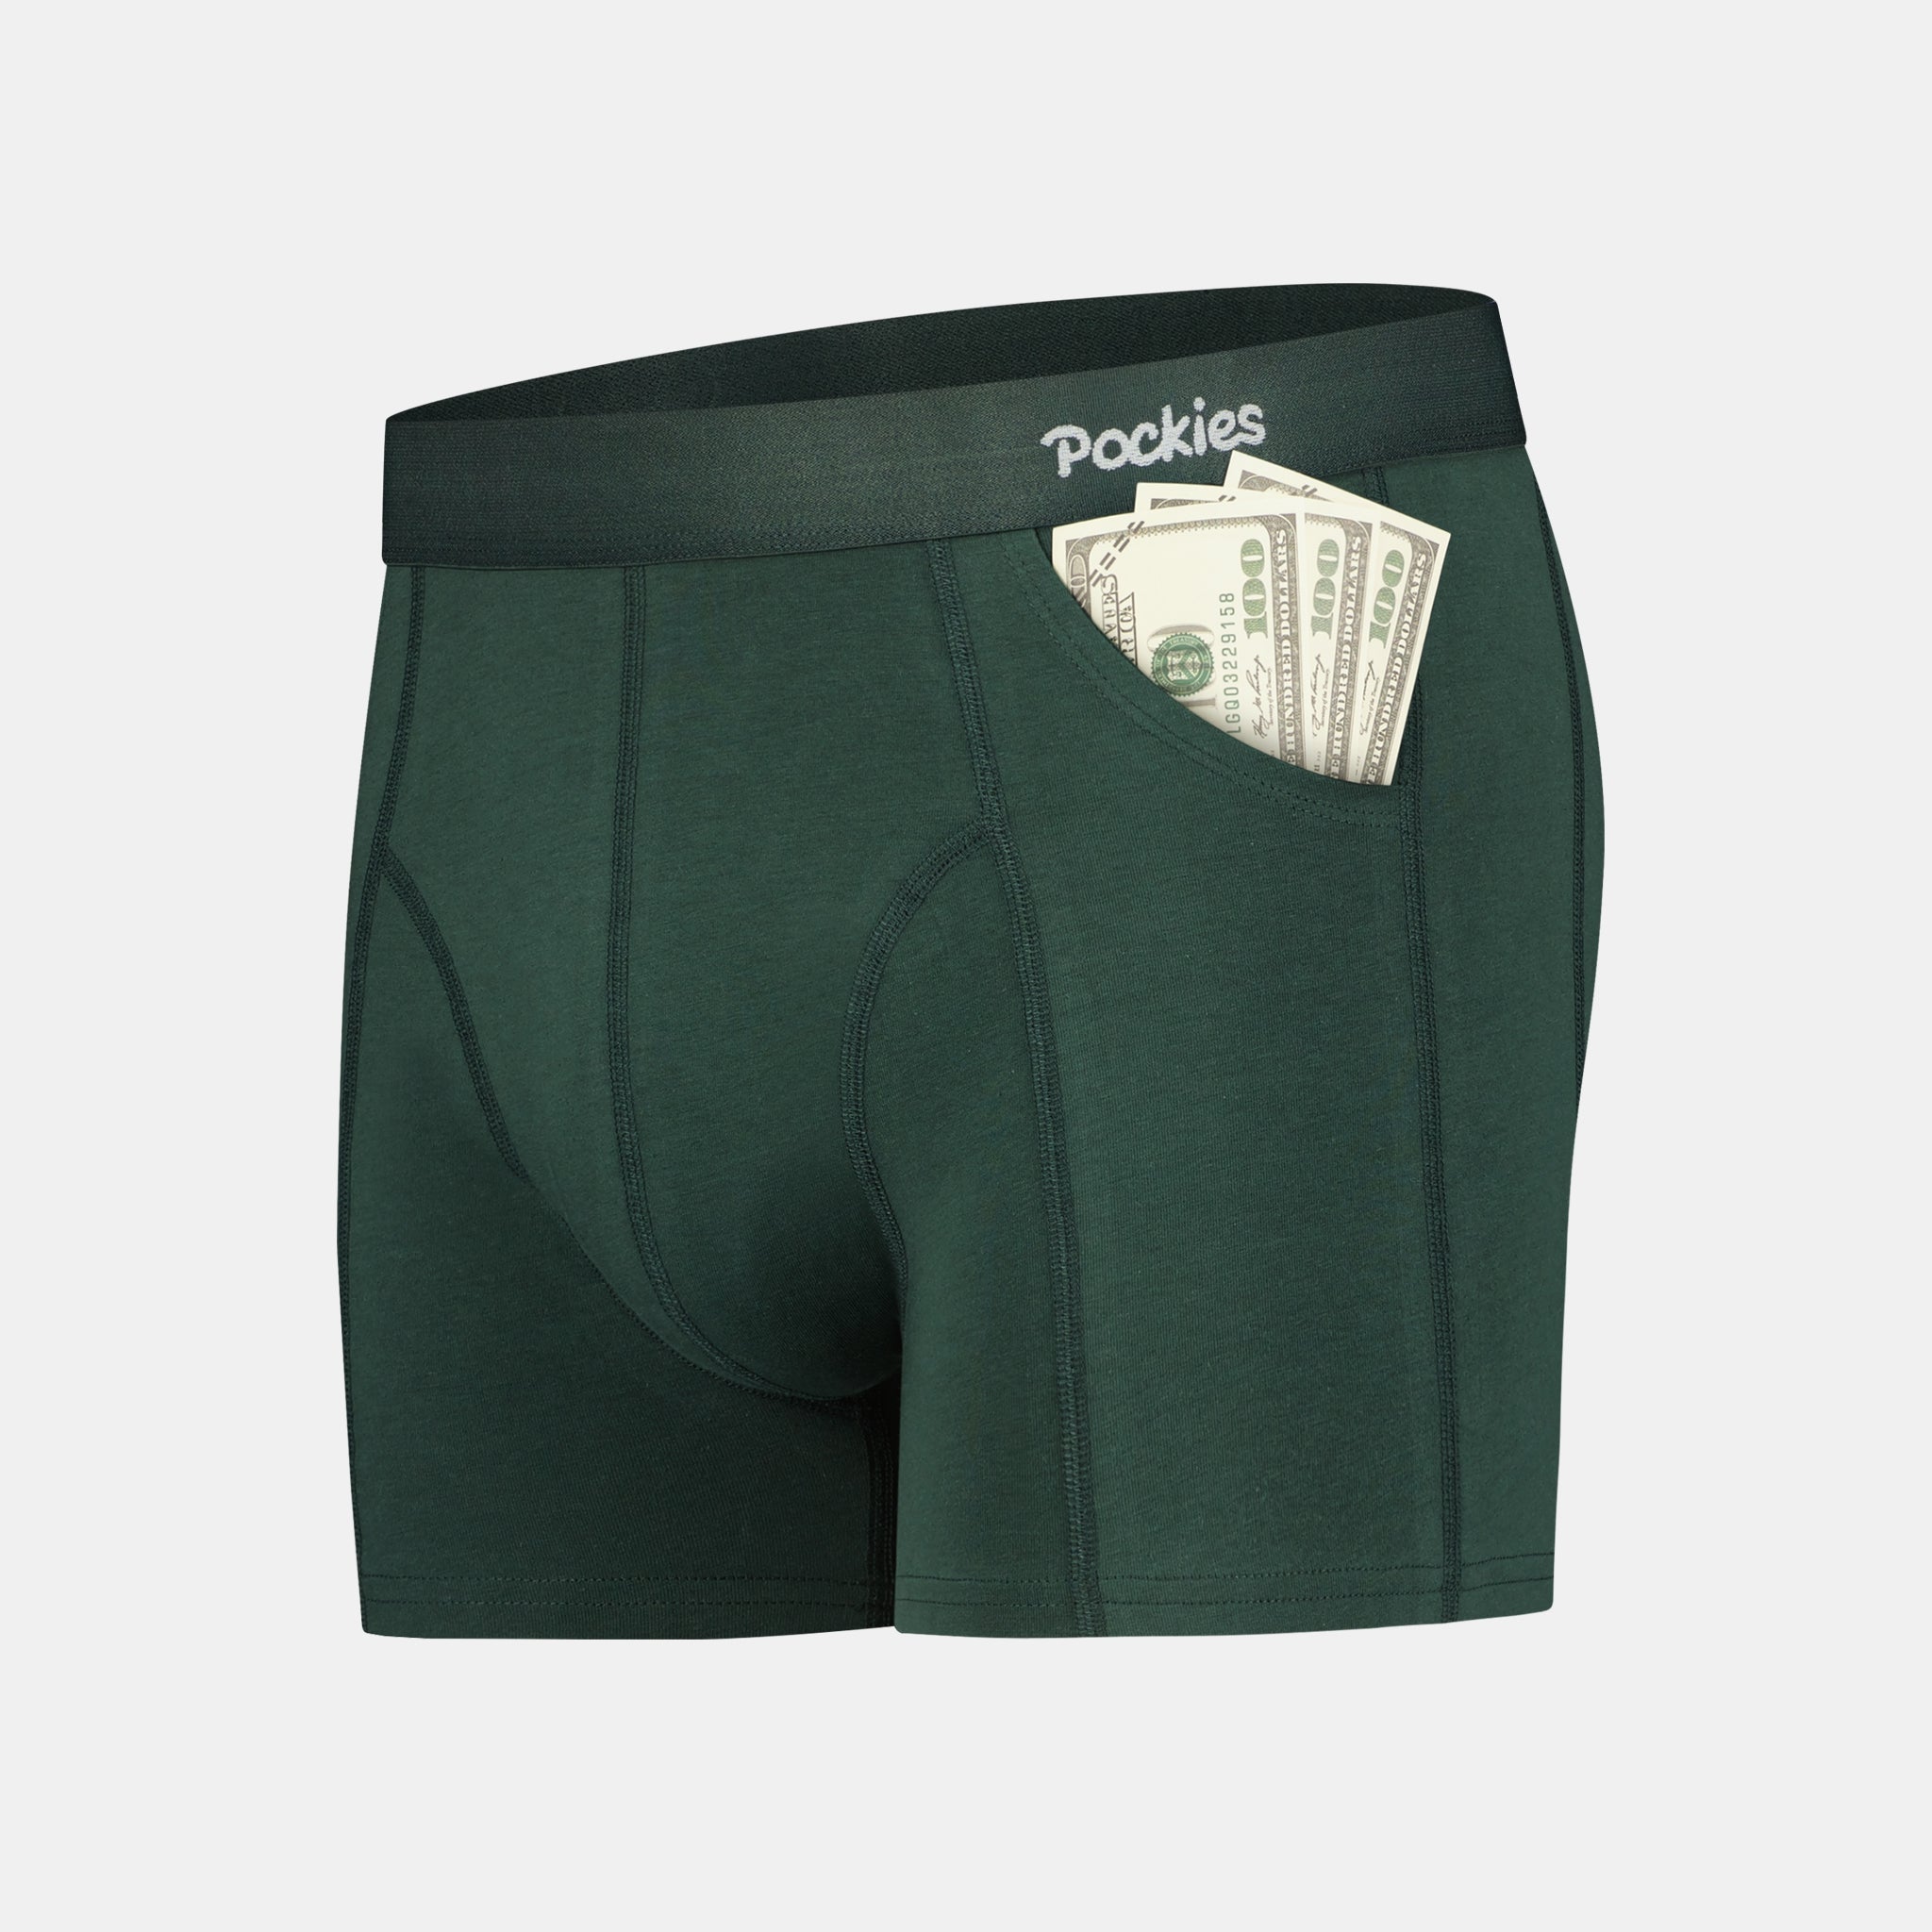 Boxer Briefs with Pockets - Underwear for your next Trip - Pockies